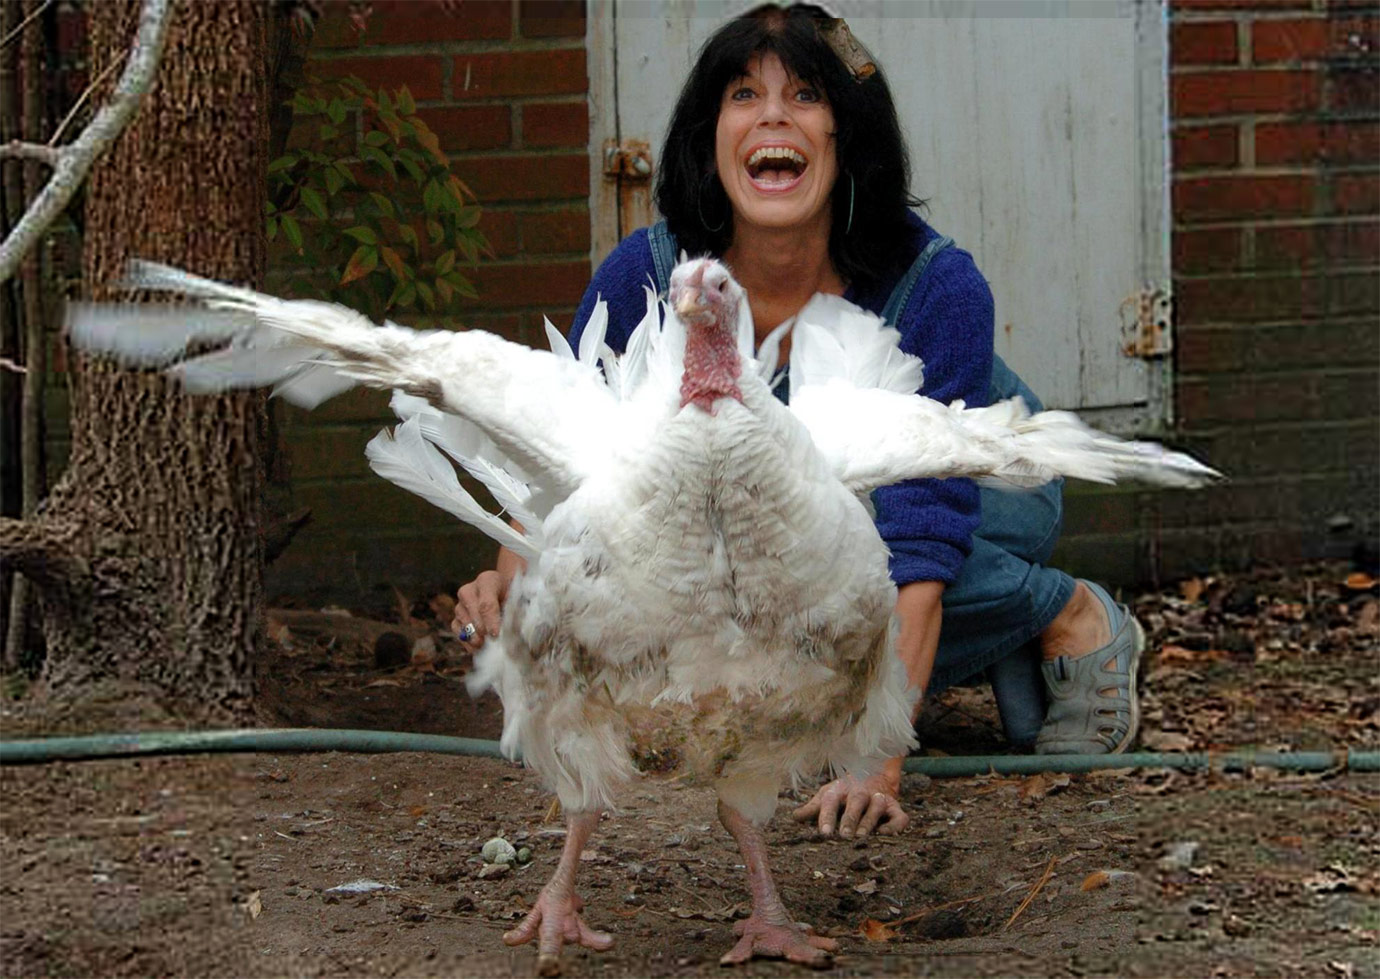 Karen laughing as Florence the turkey flaps her wings